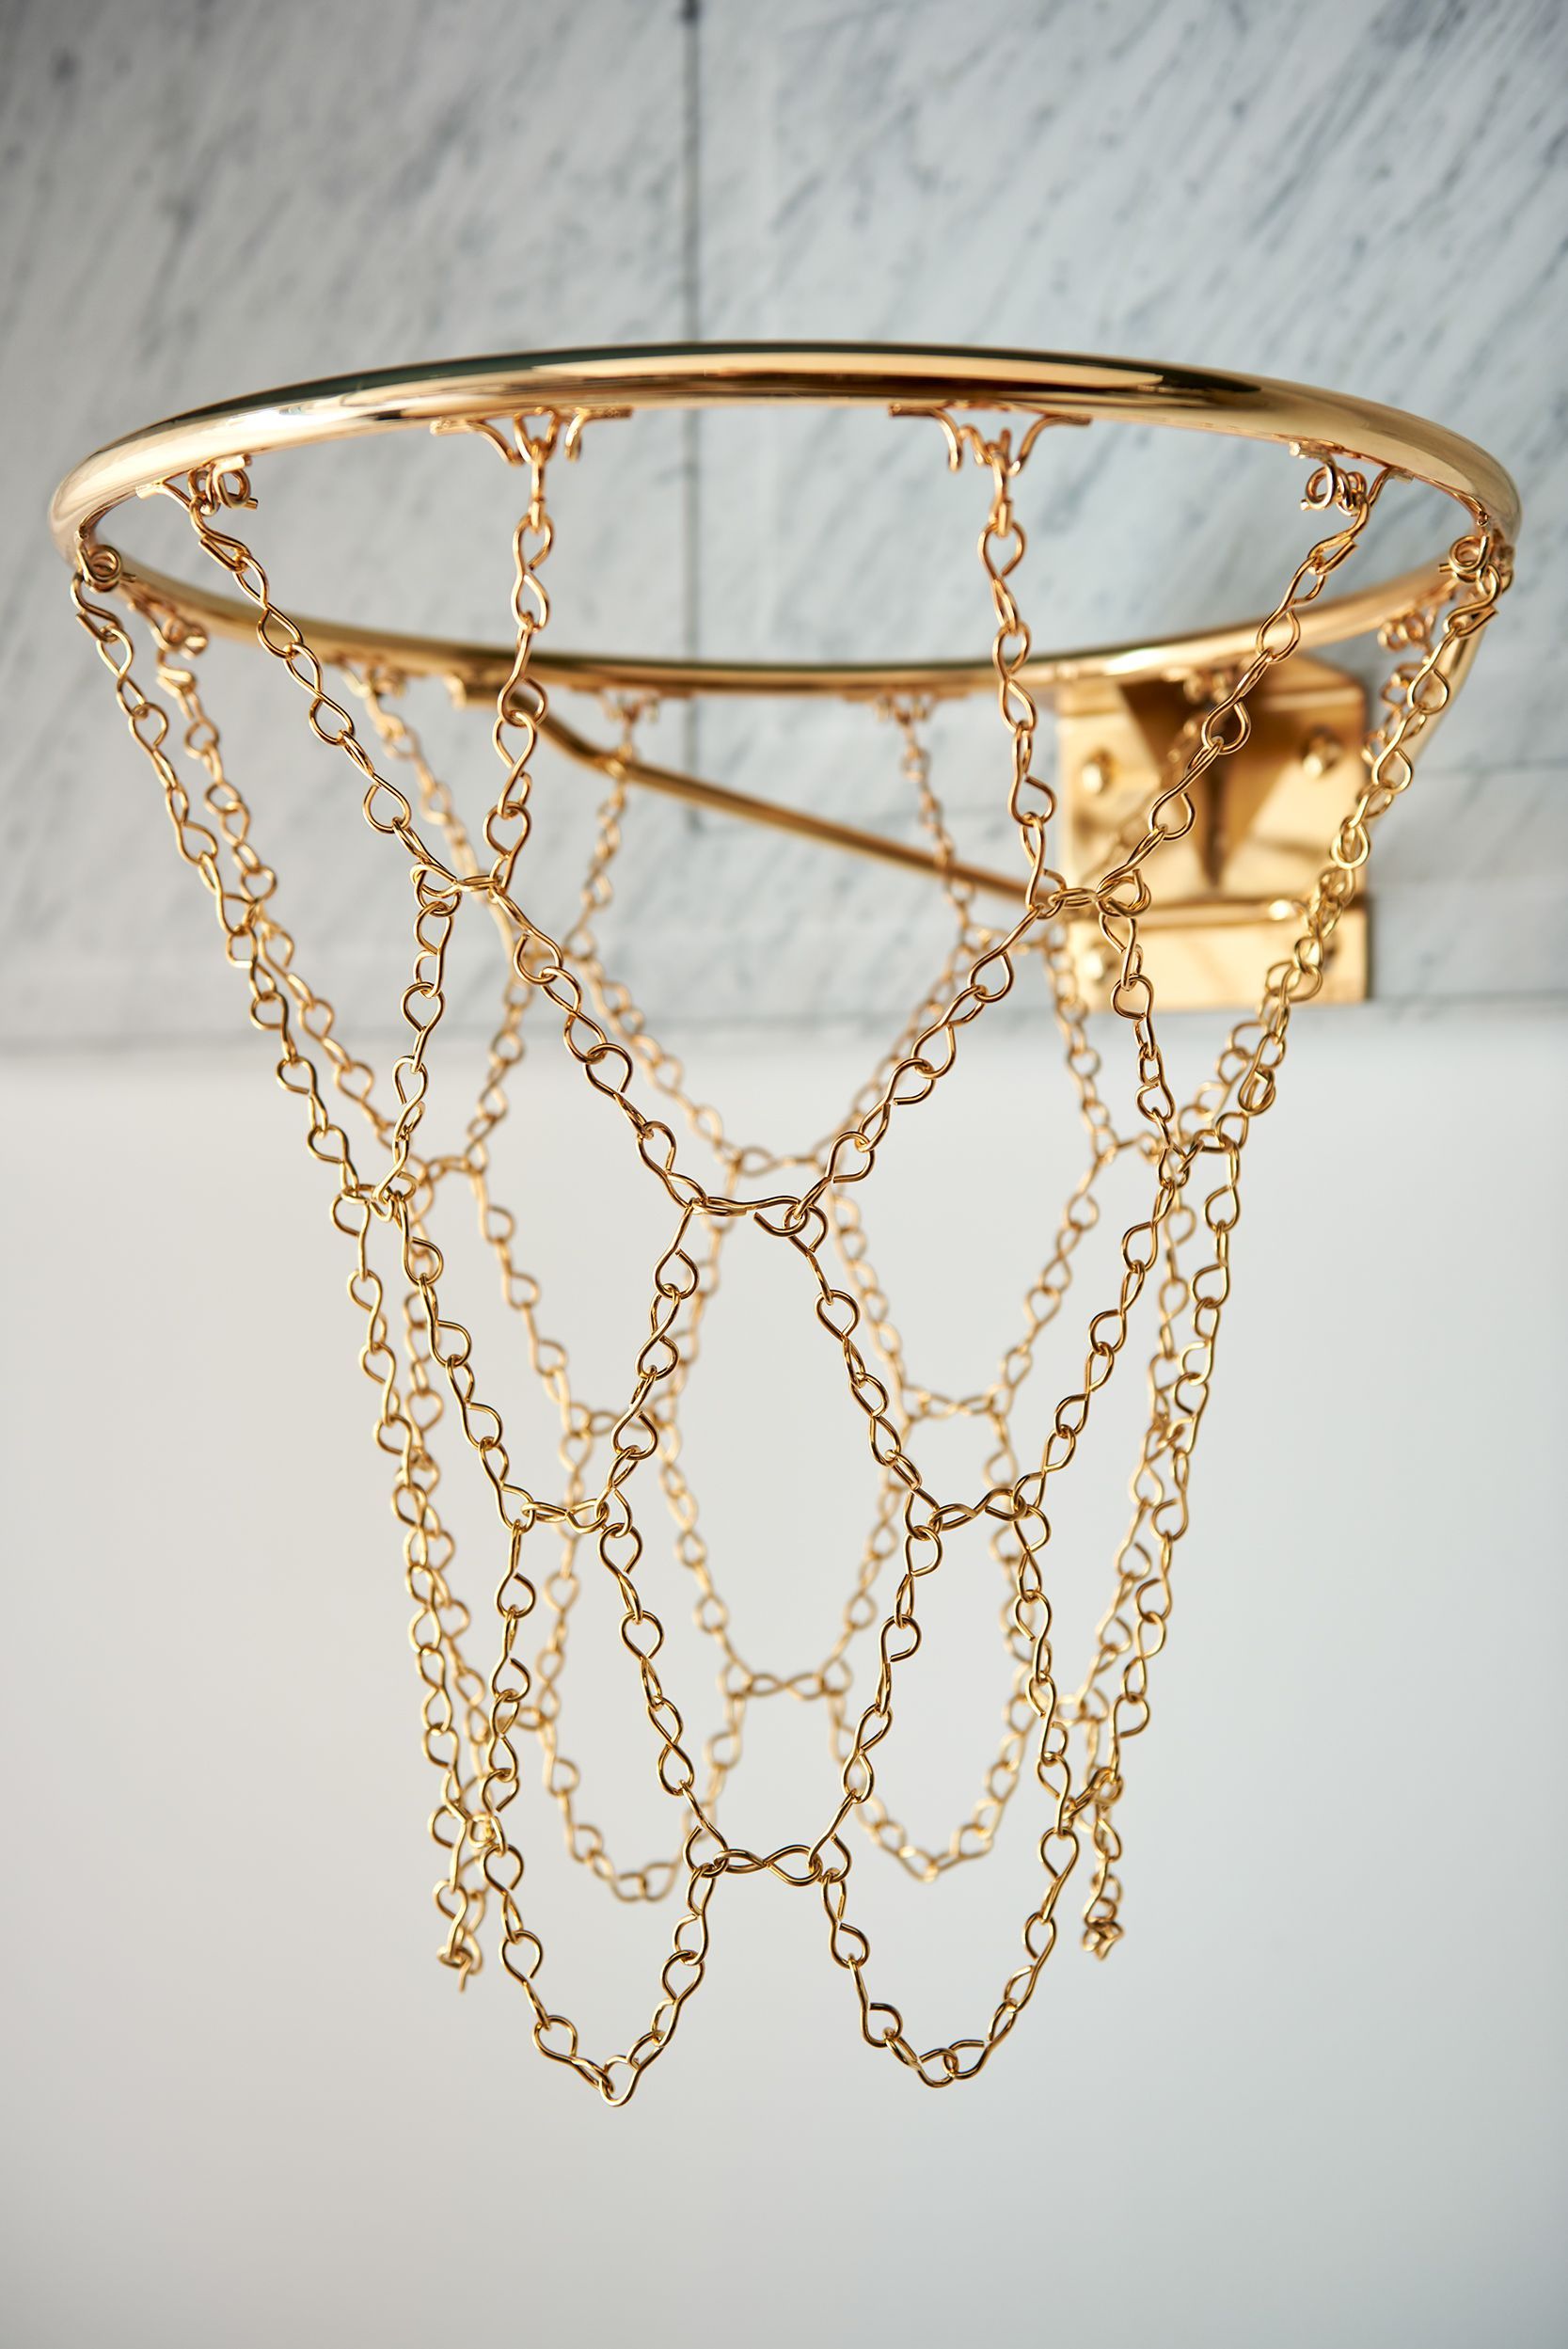 White Carrara Marble Basketball Ring Plated in 24 Carat Gold Cool Hunter. Basketball ring, Gold, Carat gold